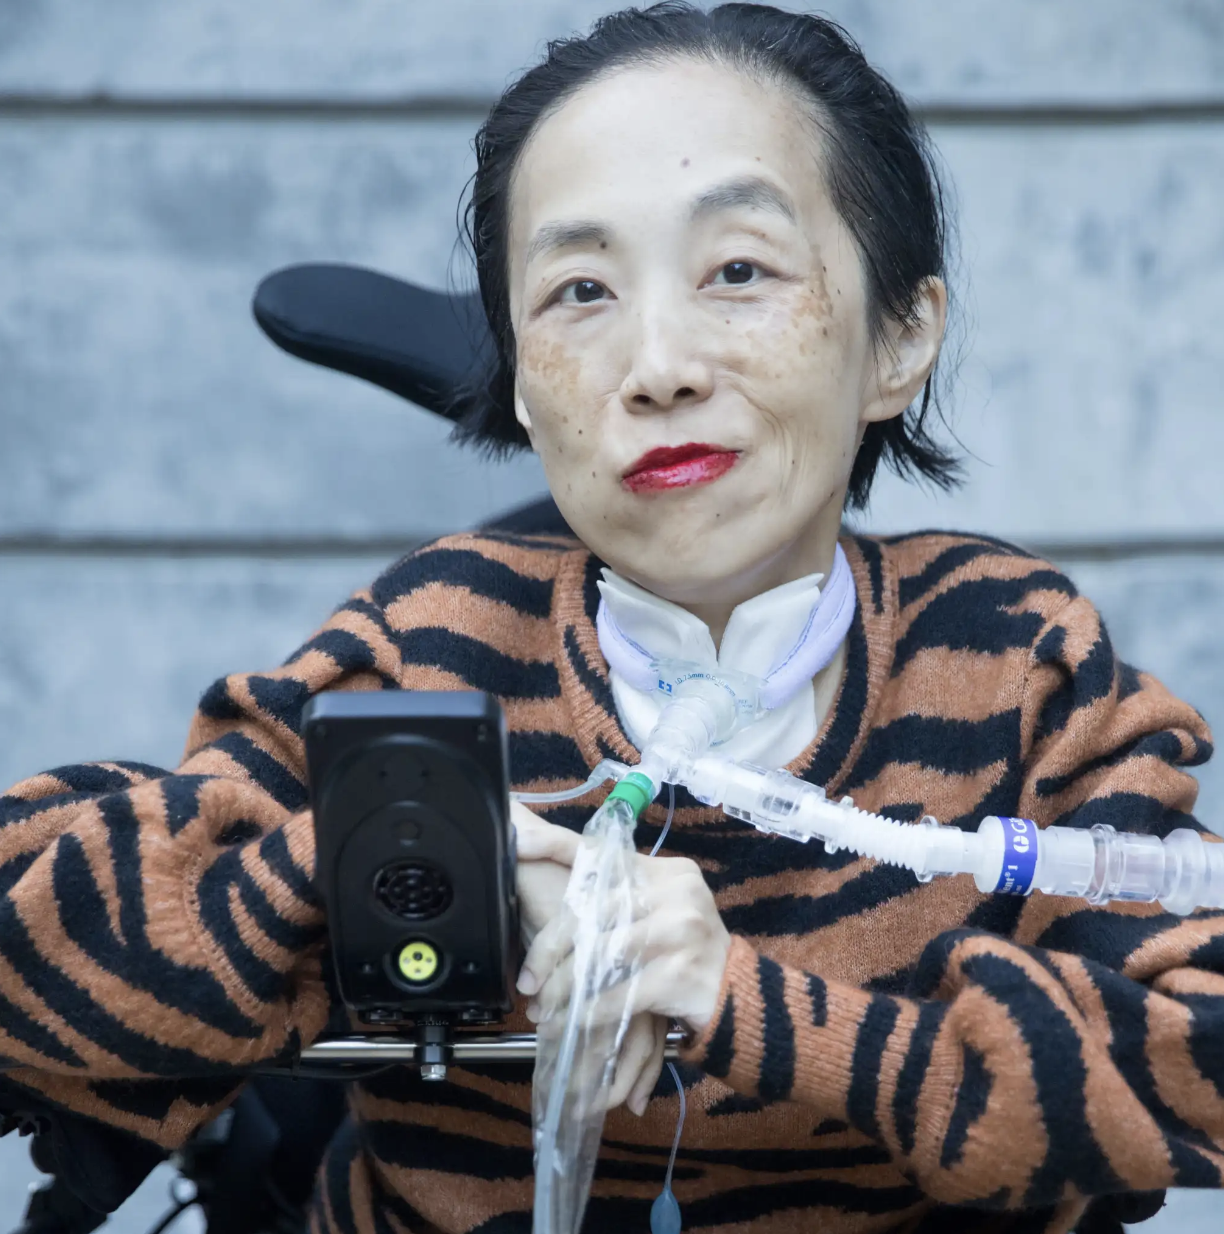 Photo of Alice Wong, an Asian American disabled woman in a power chair. She is wearing a black blouse with a floral print, a bold red lip color and a trach at her neck. She is giving a cheeky expression with her eyebrow partially raised. In the background is a gray cement wall. Photo credit: Eddie Hernandez Photography.